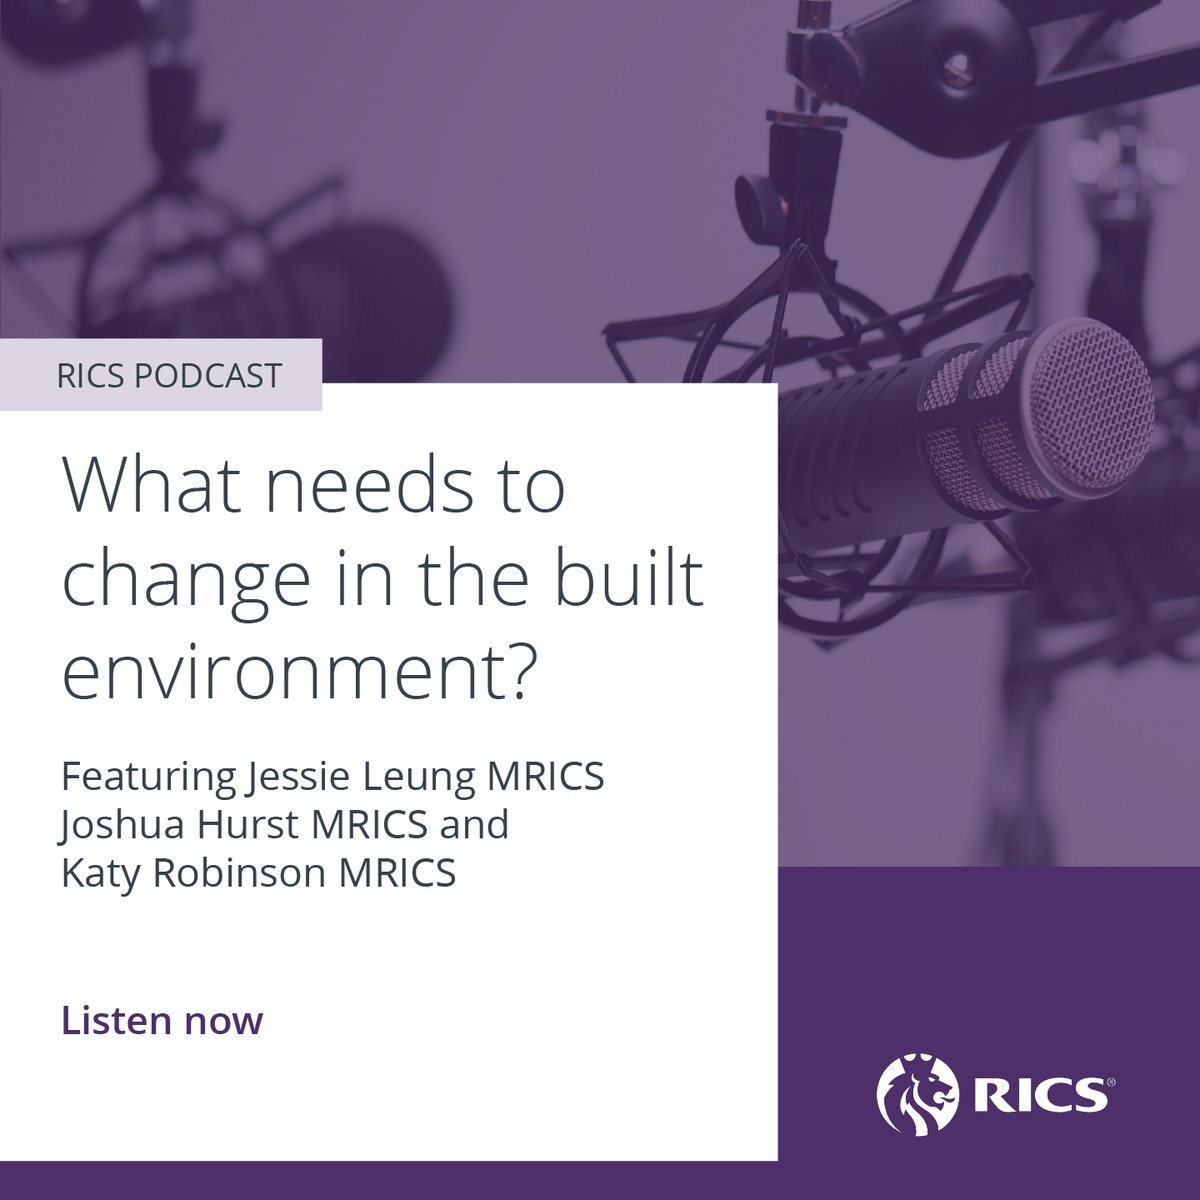 💭 What impact do you have on the #BuiltEnvironment as an RICS surveyor? We are pleased to share some examples in this episode - meet some of our next generation professionals making a difference! Read more 👉 ms.spr.ly/6014c4ify @East_Riding @JLL @sgloscouncil